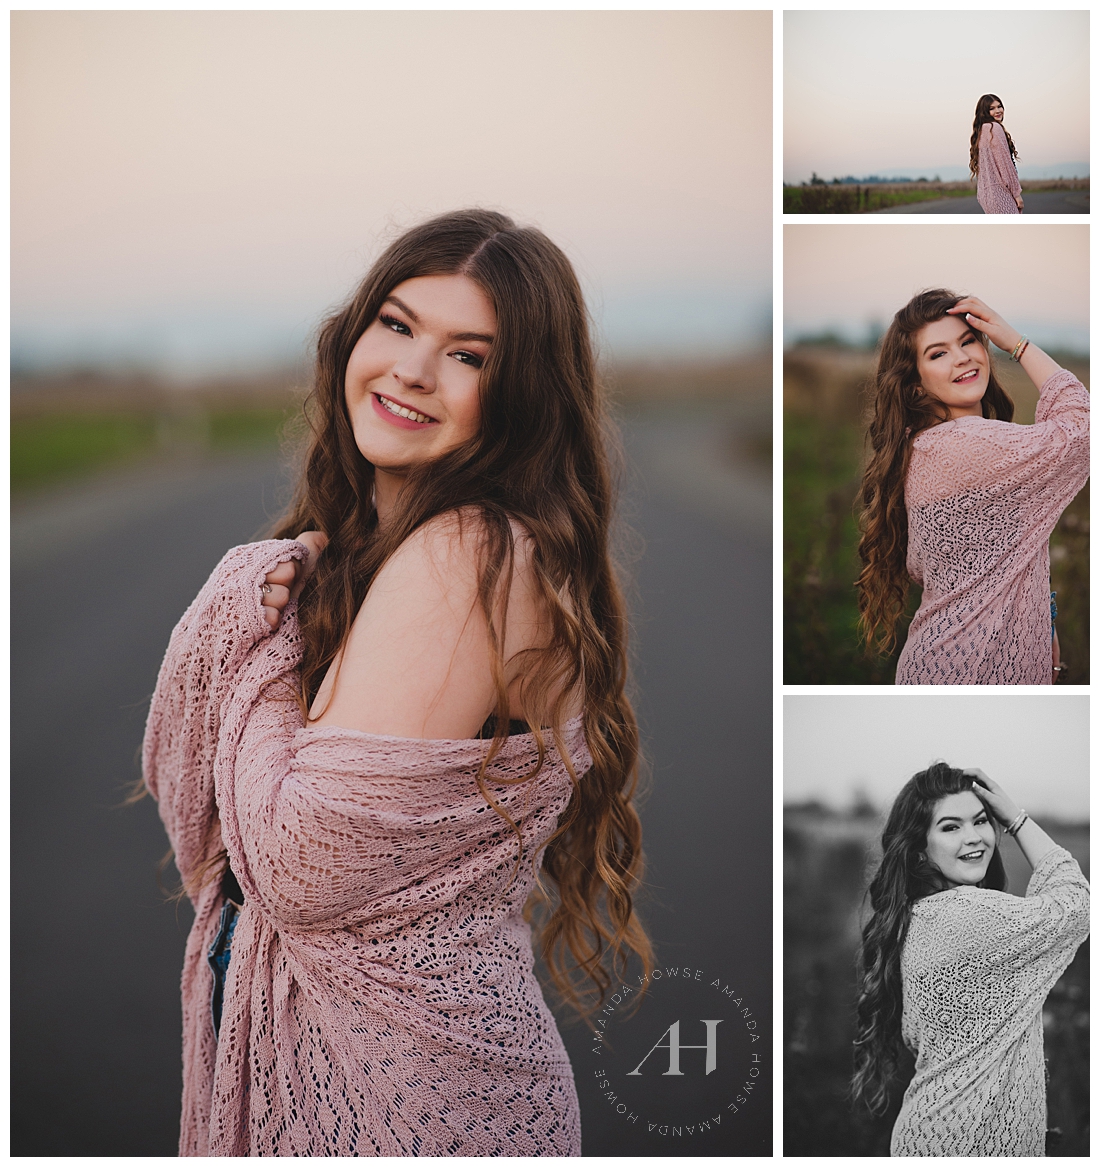 Pose Ideas for Senior Girls | Lake Tapps Golden Hour, Sunset Senior Portraits, How to Style a Cardigan for Senior Portraits | Photographed by the Best Tacoma Senior Photographer Amanda Howse